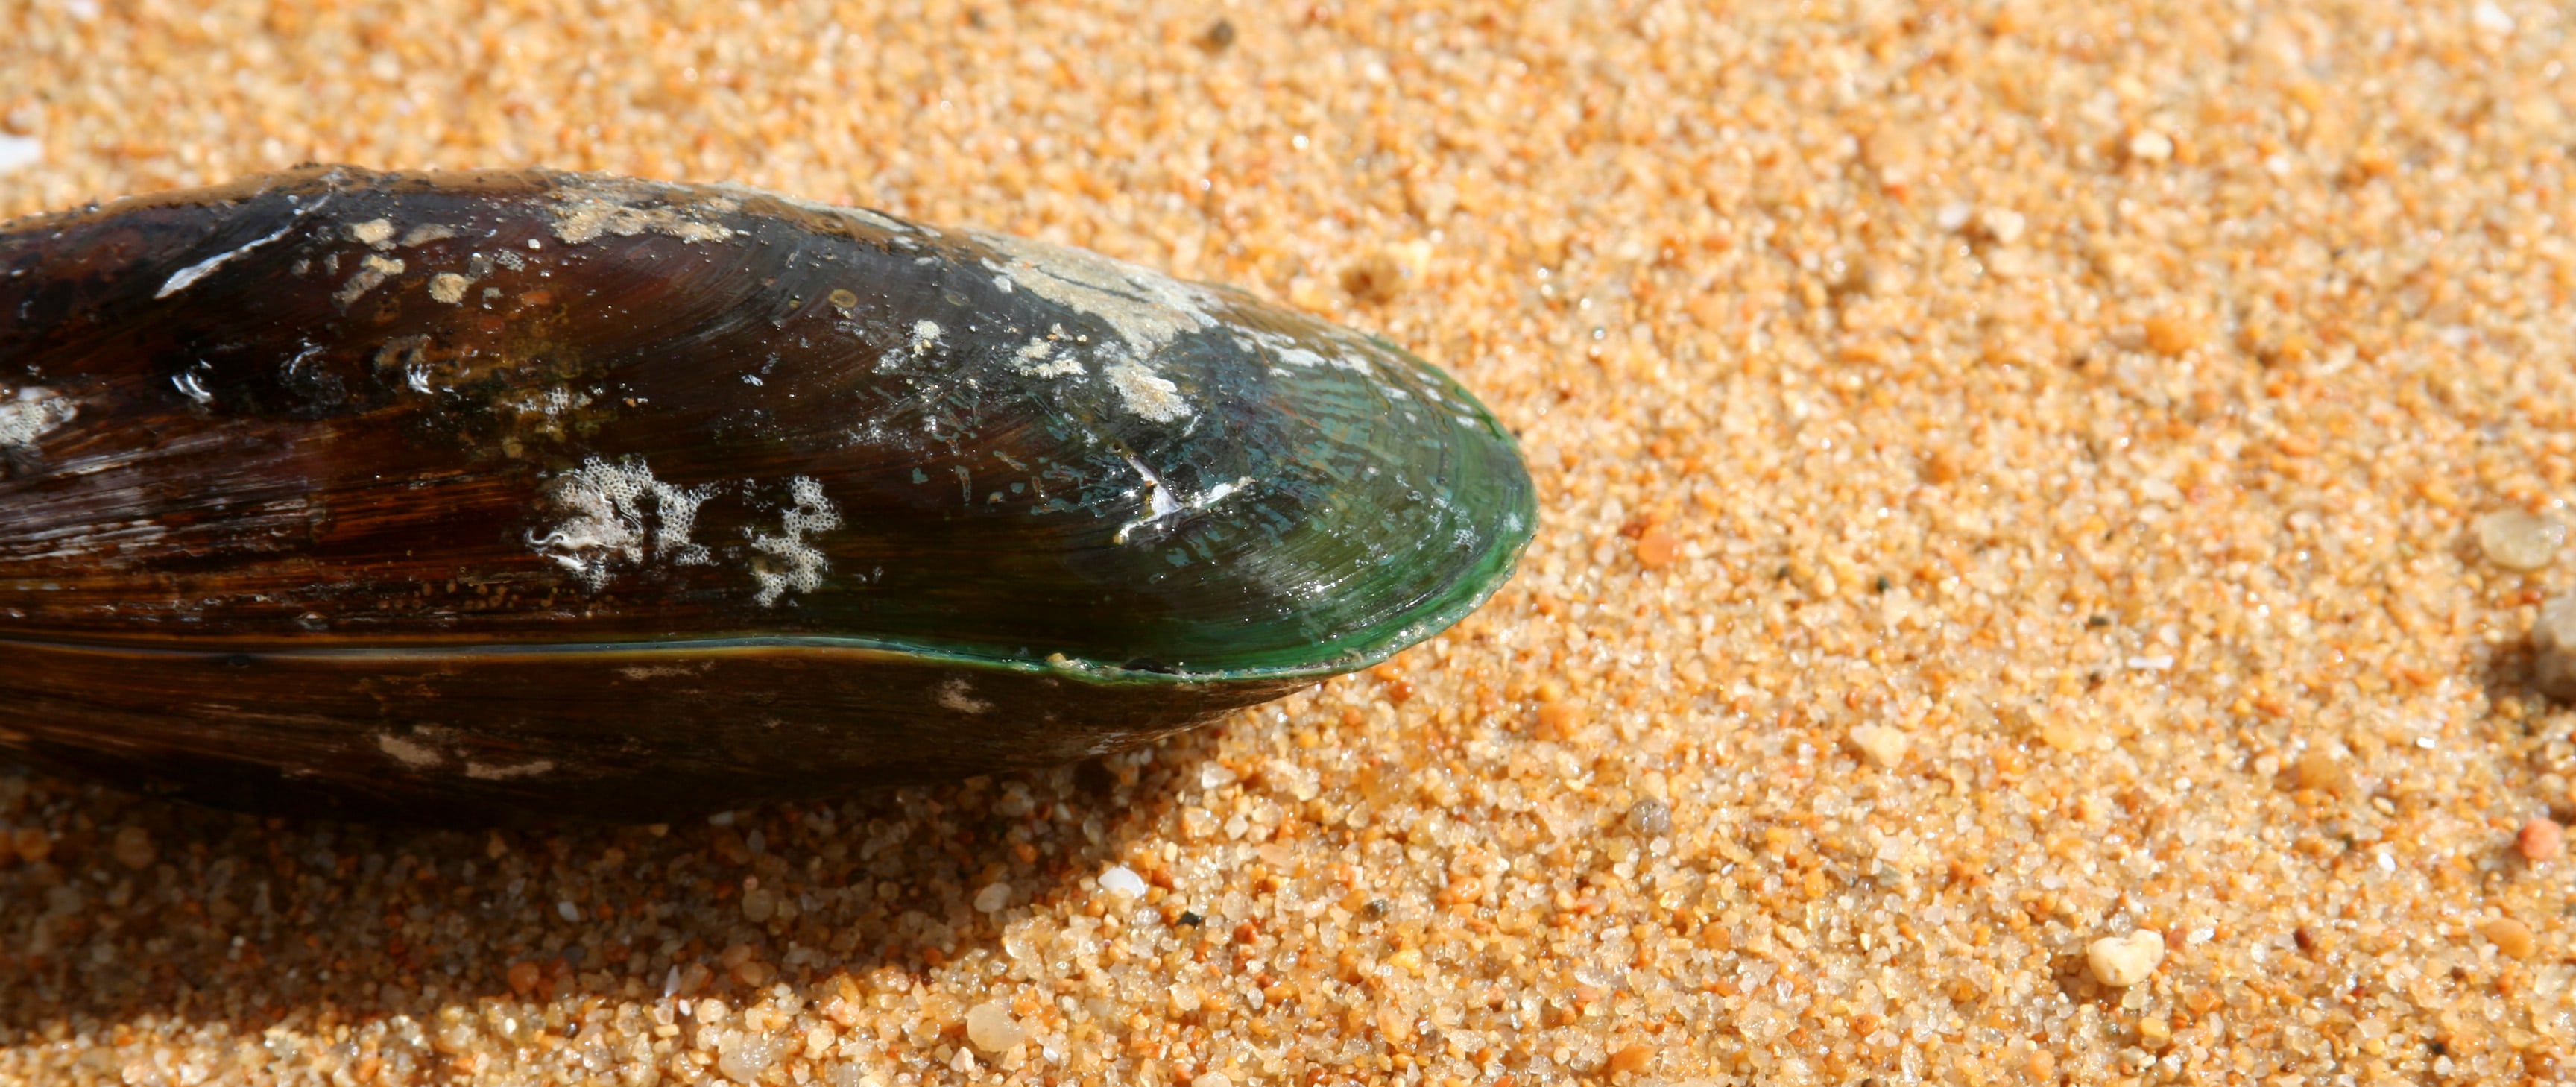 green lipped mussel benefits for pets